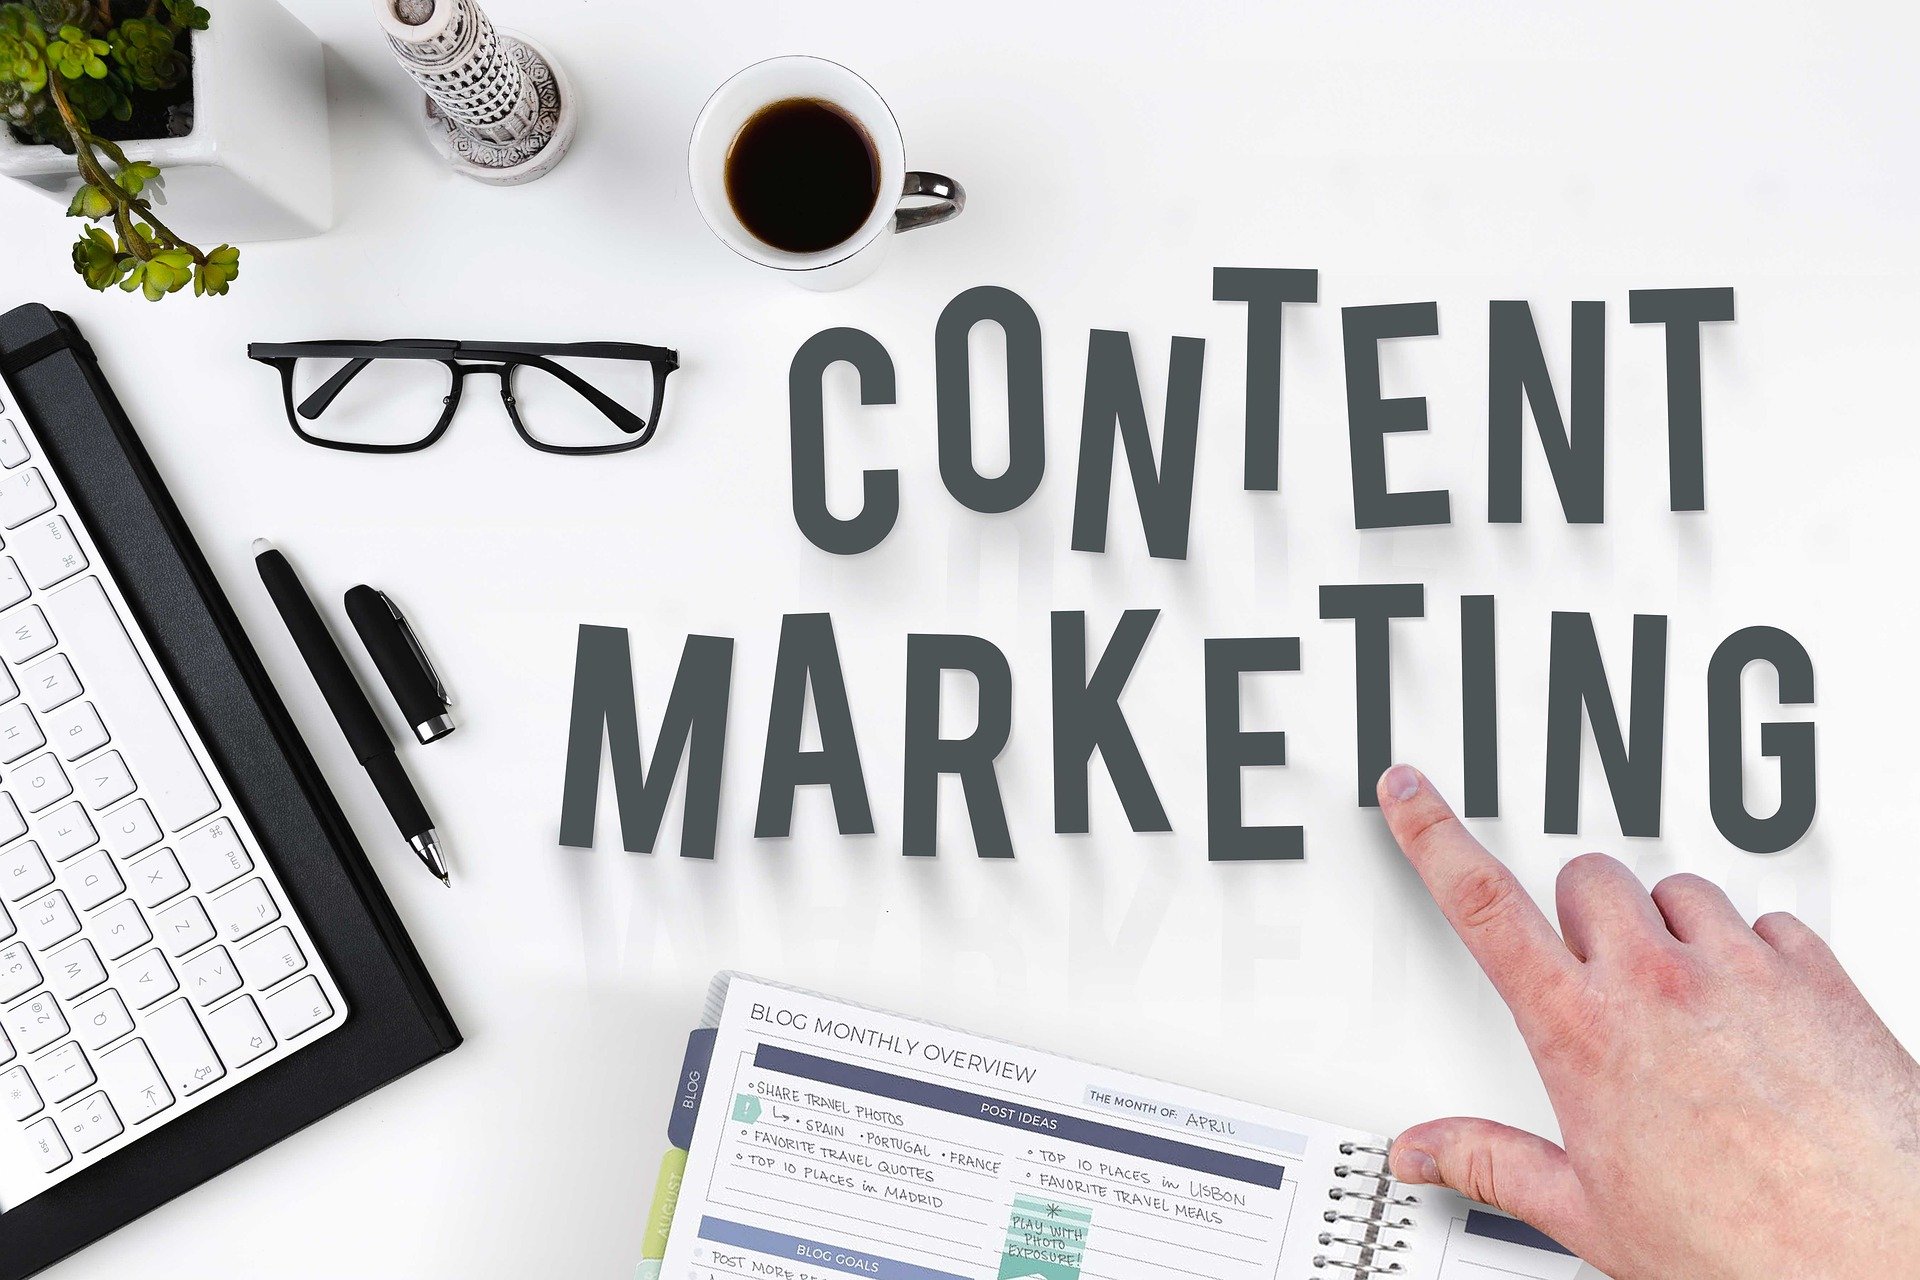 Elevating your Content Marketing Strategy